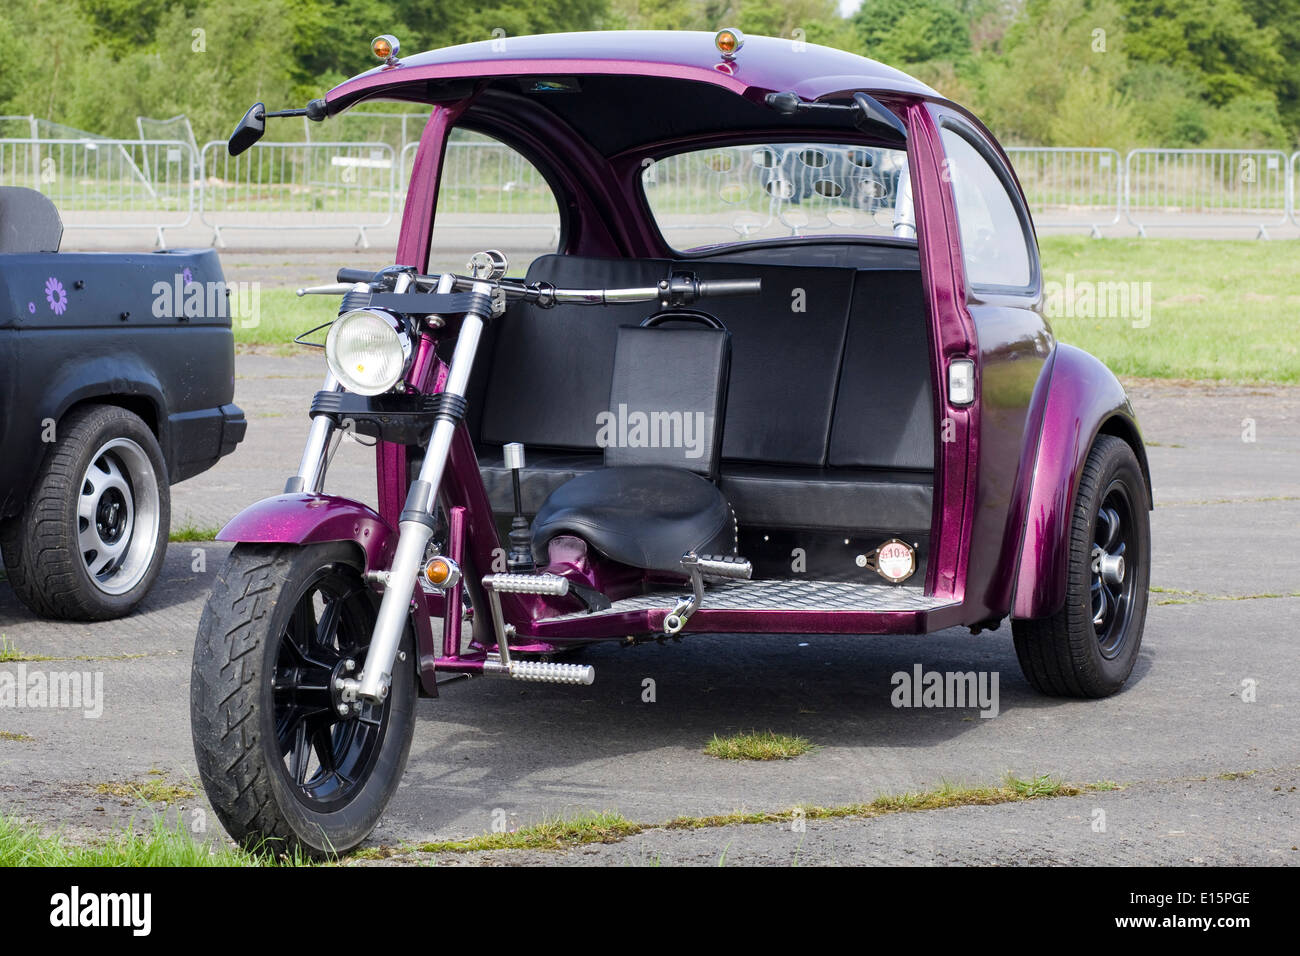 motorcycle frame attached to the back of a Volkswagen Beetle Stock Photo